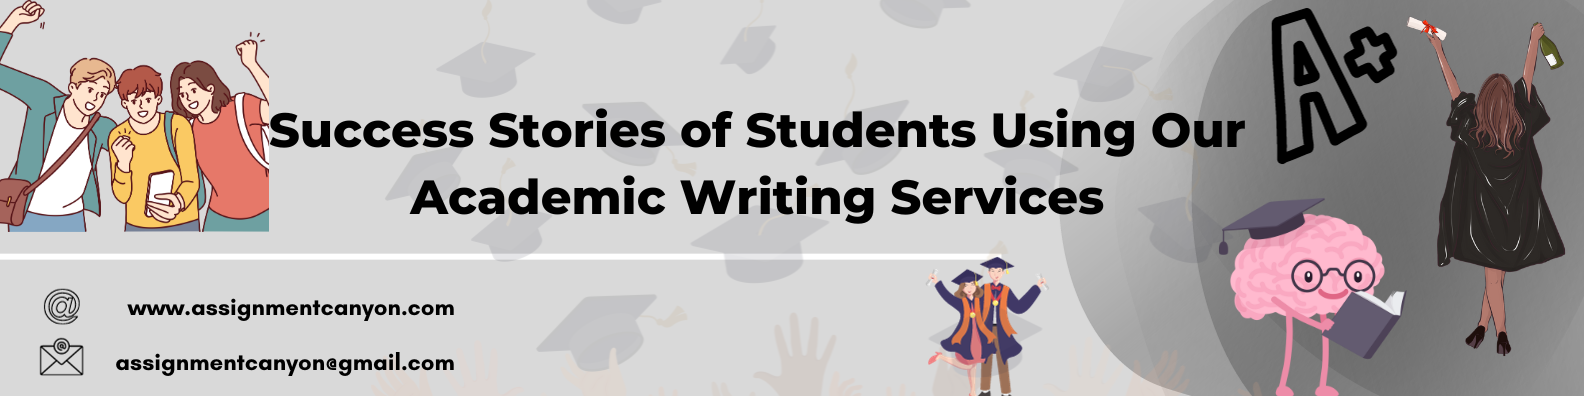 From Struggle to Triumph: Unveiling Lessons from Our Heroes’ Stories who got academic writing services from Assignment Canyon